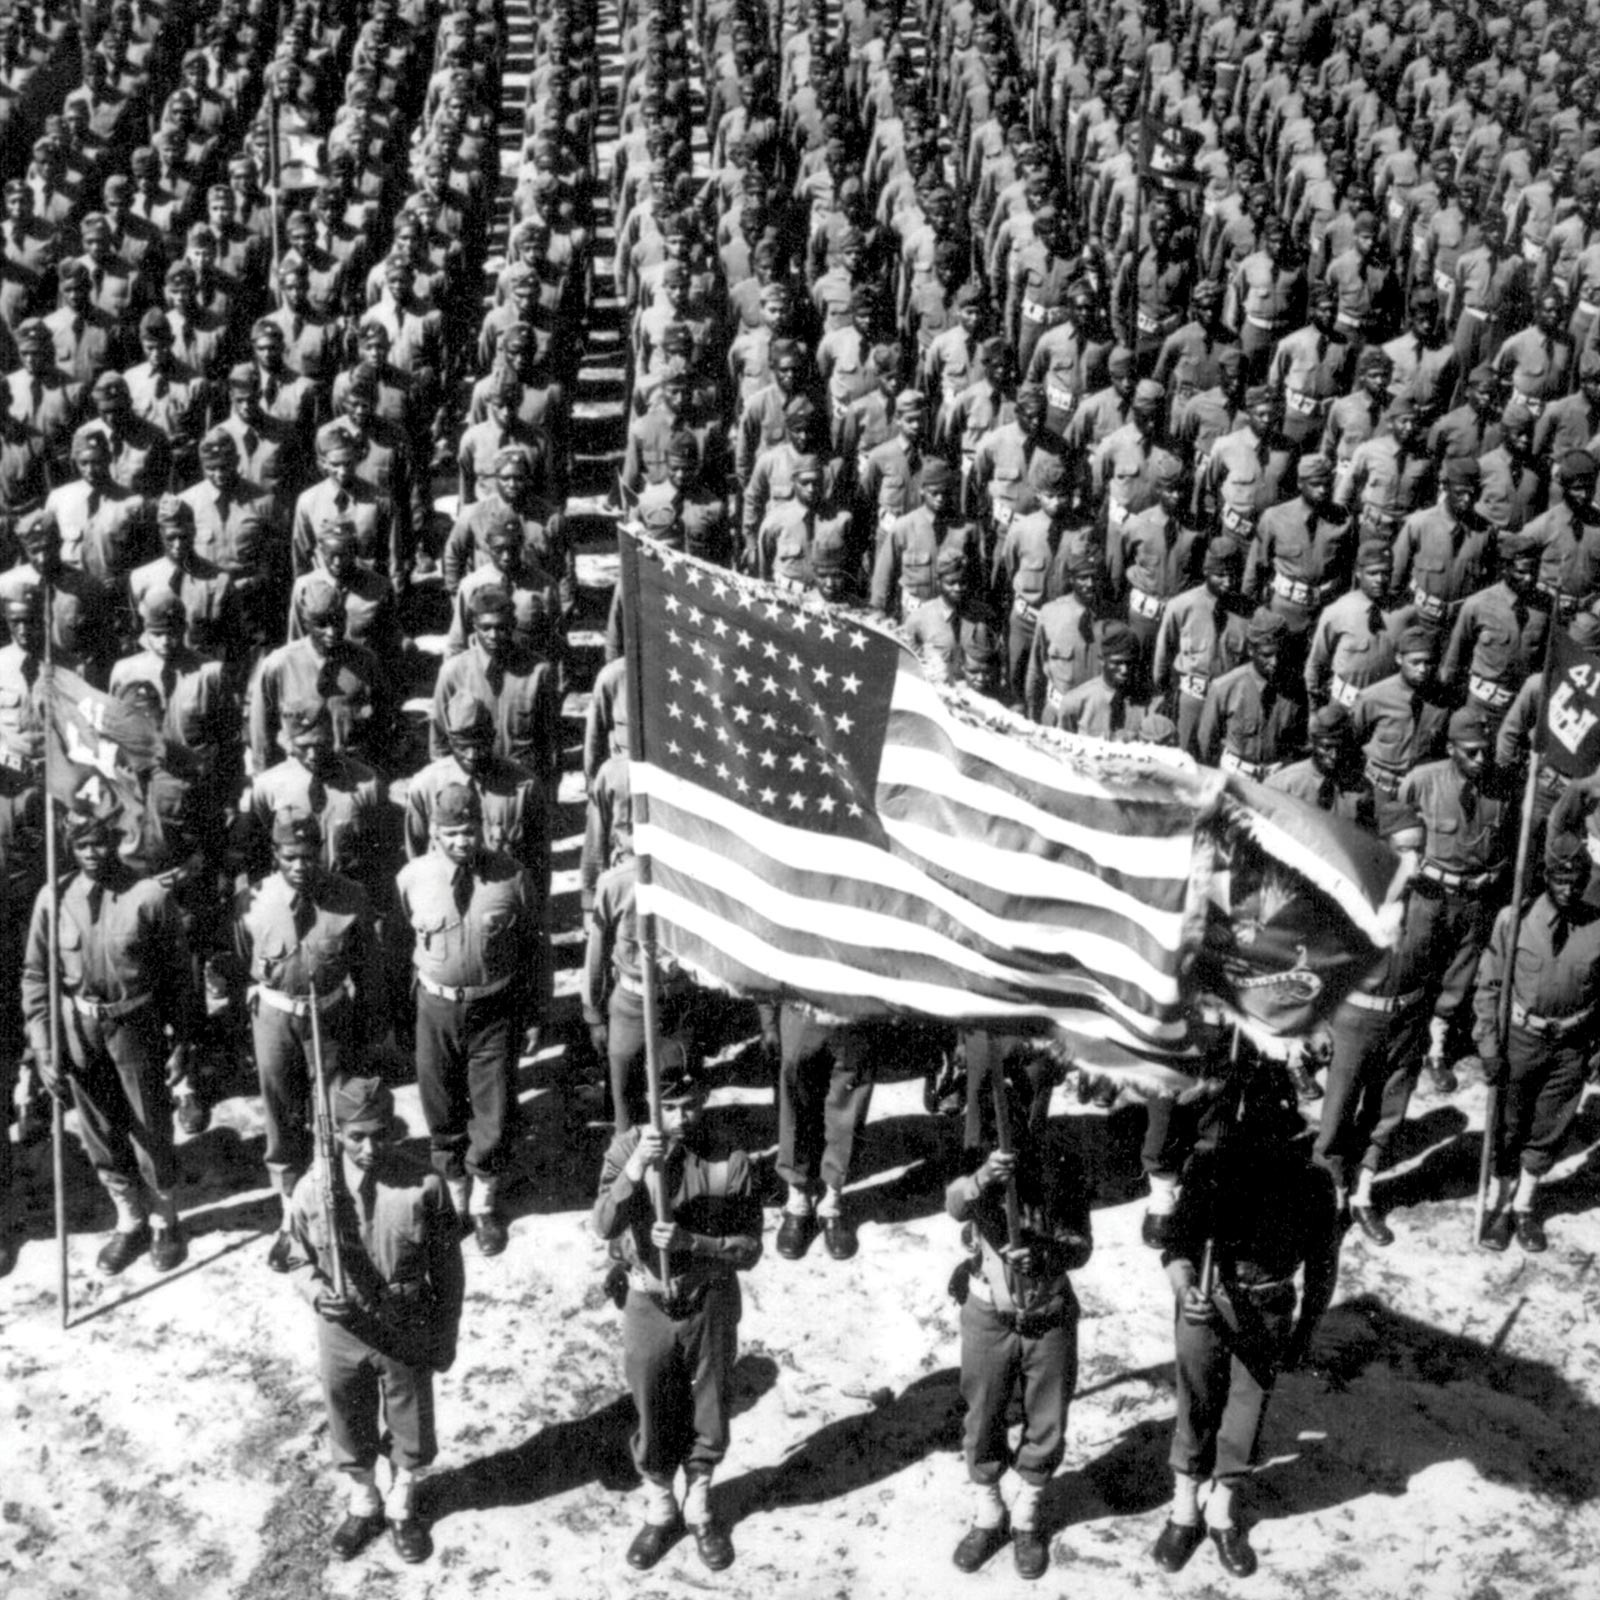 Black troops line up in formation in front of a color guard with a large American flag.